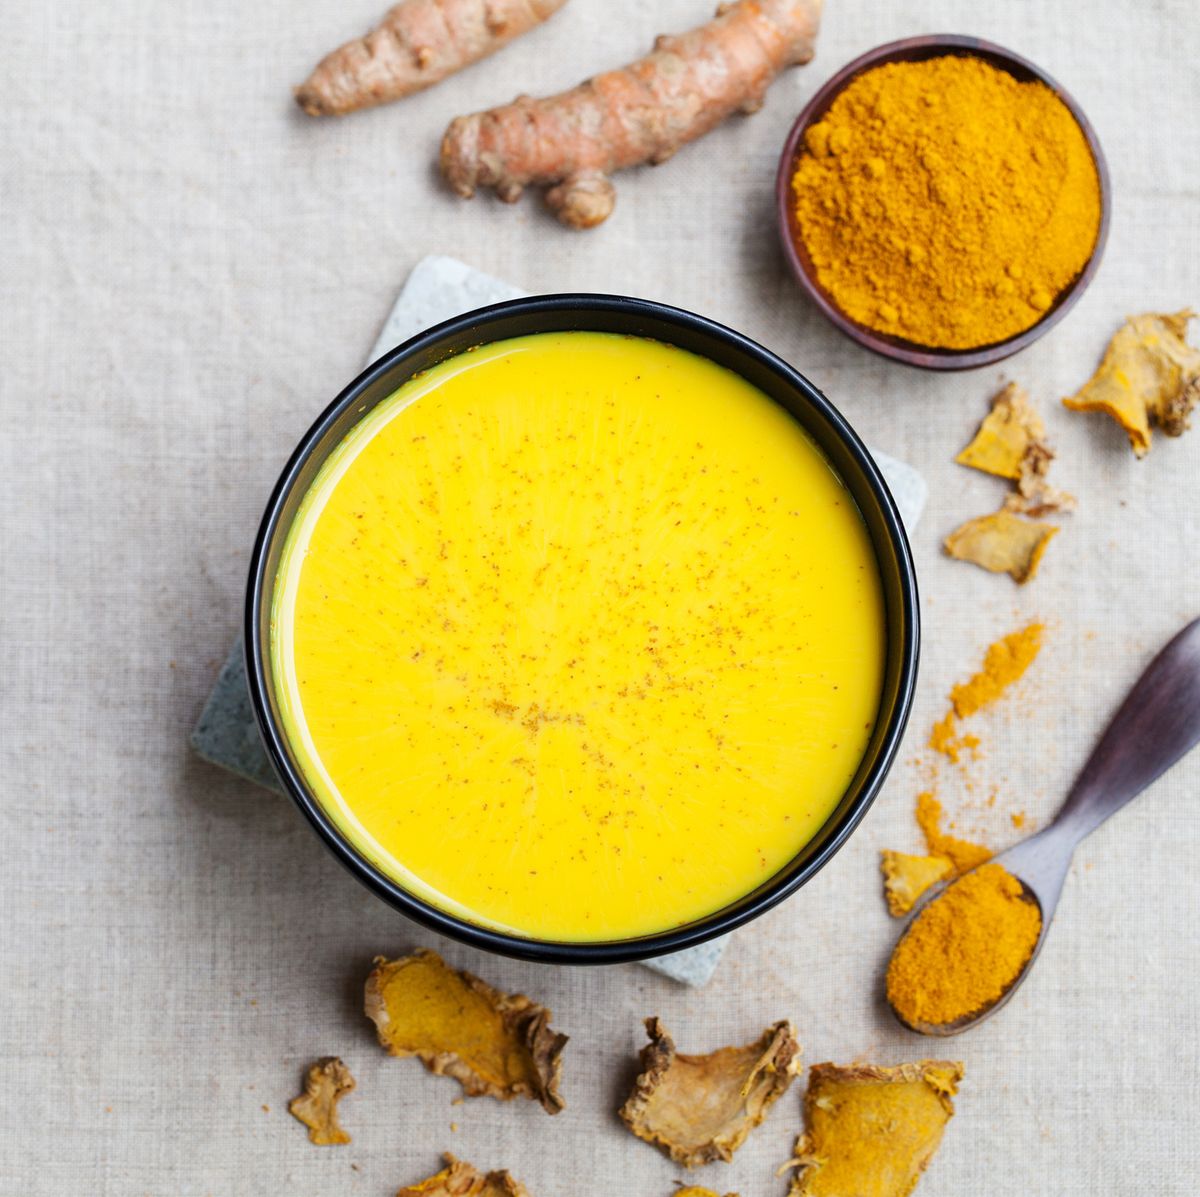 Turmeric Benefits - Why Turmeric May Be Beneficial For Pain, Skin,  Inflammation, and More